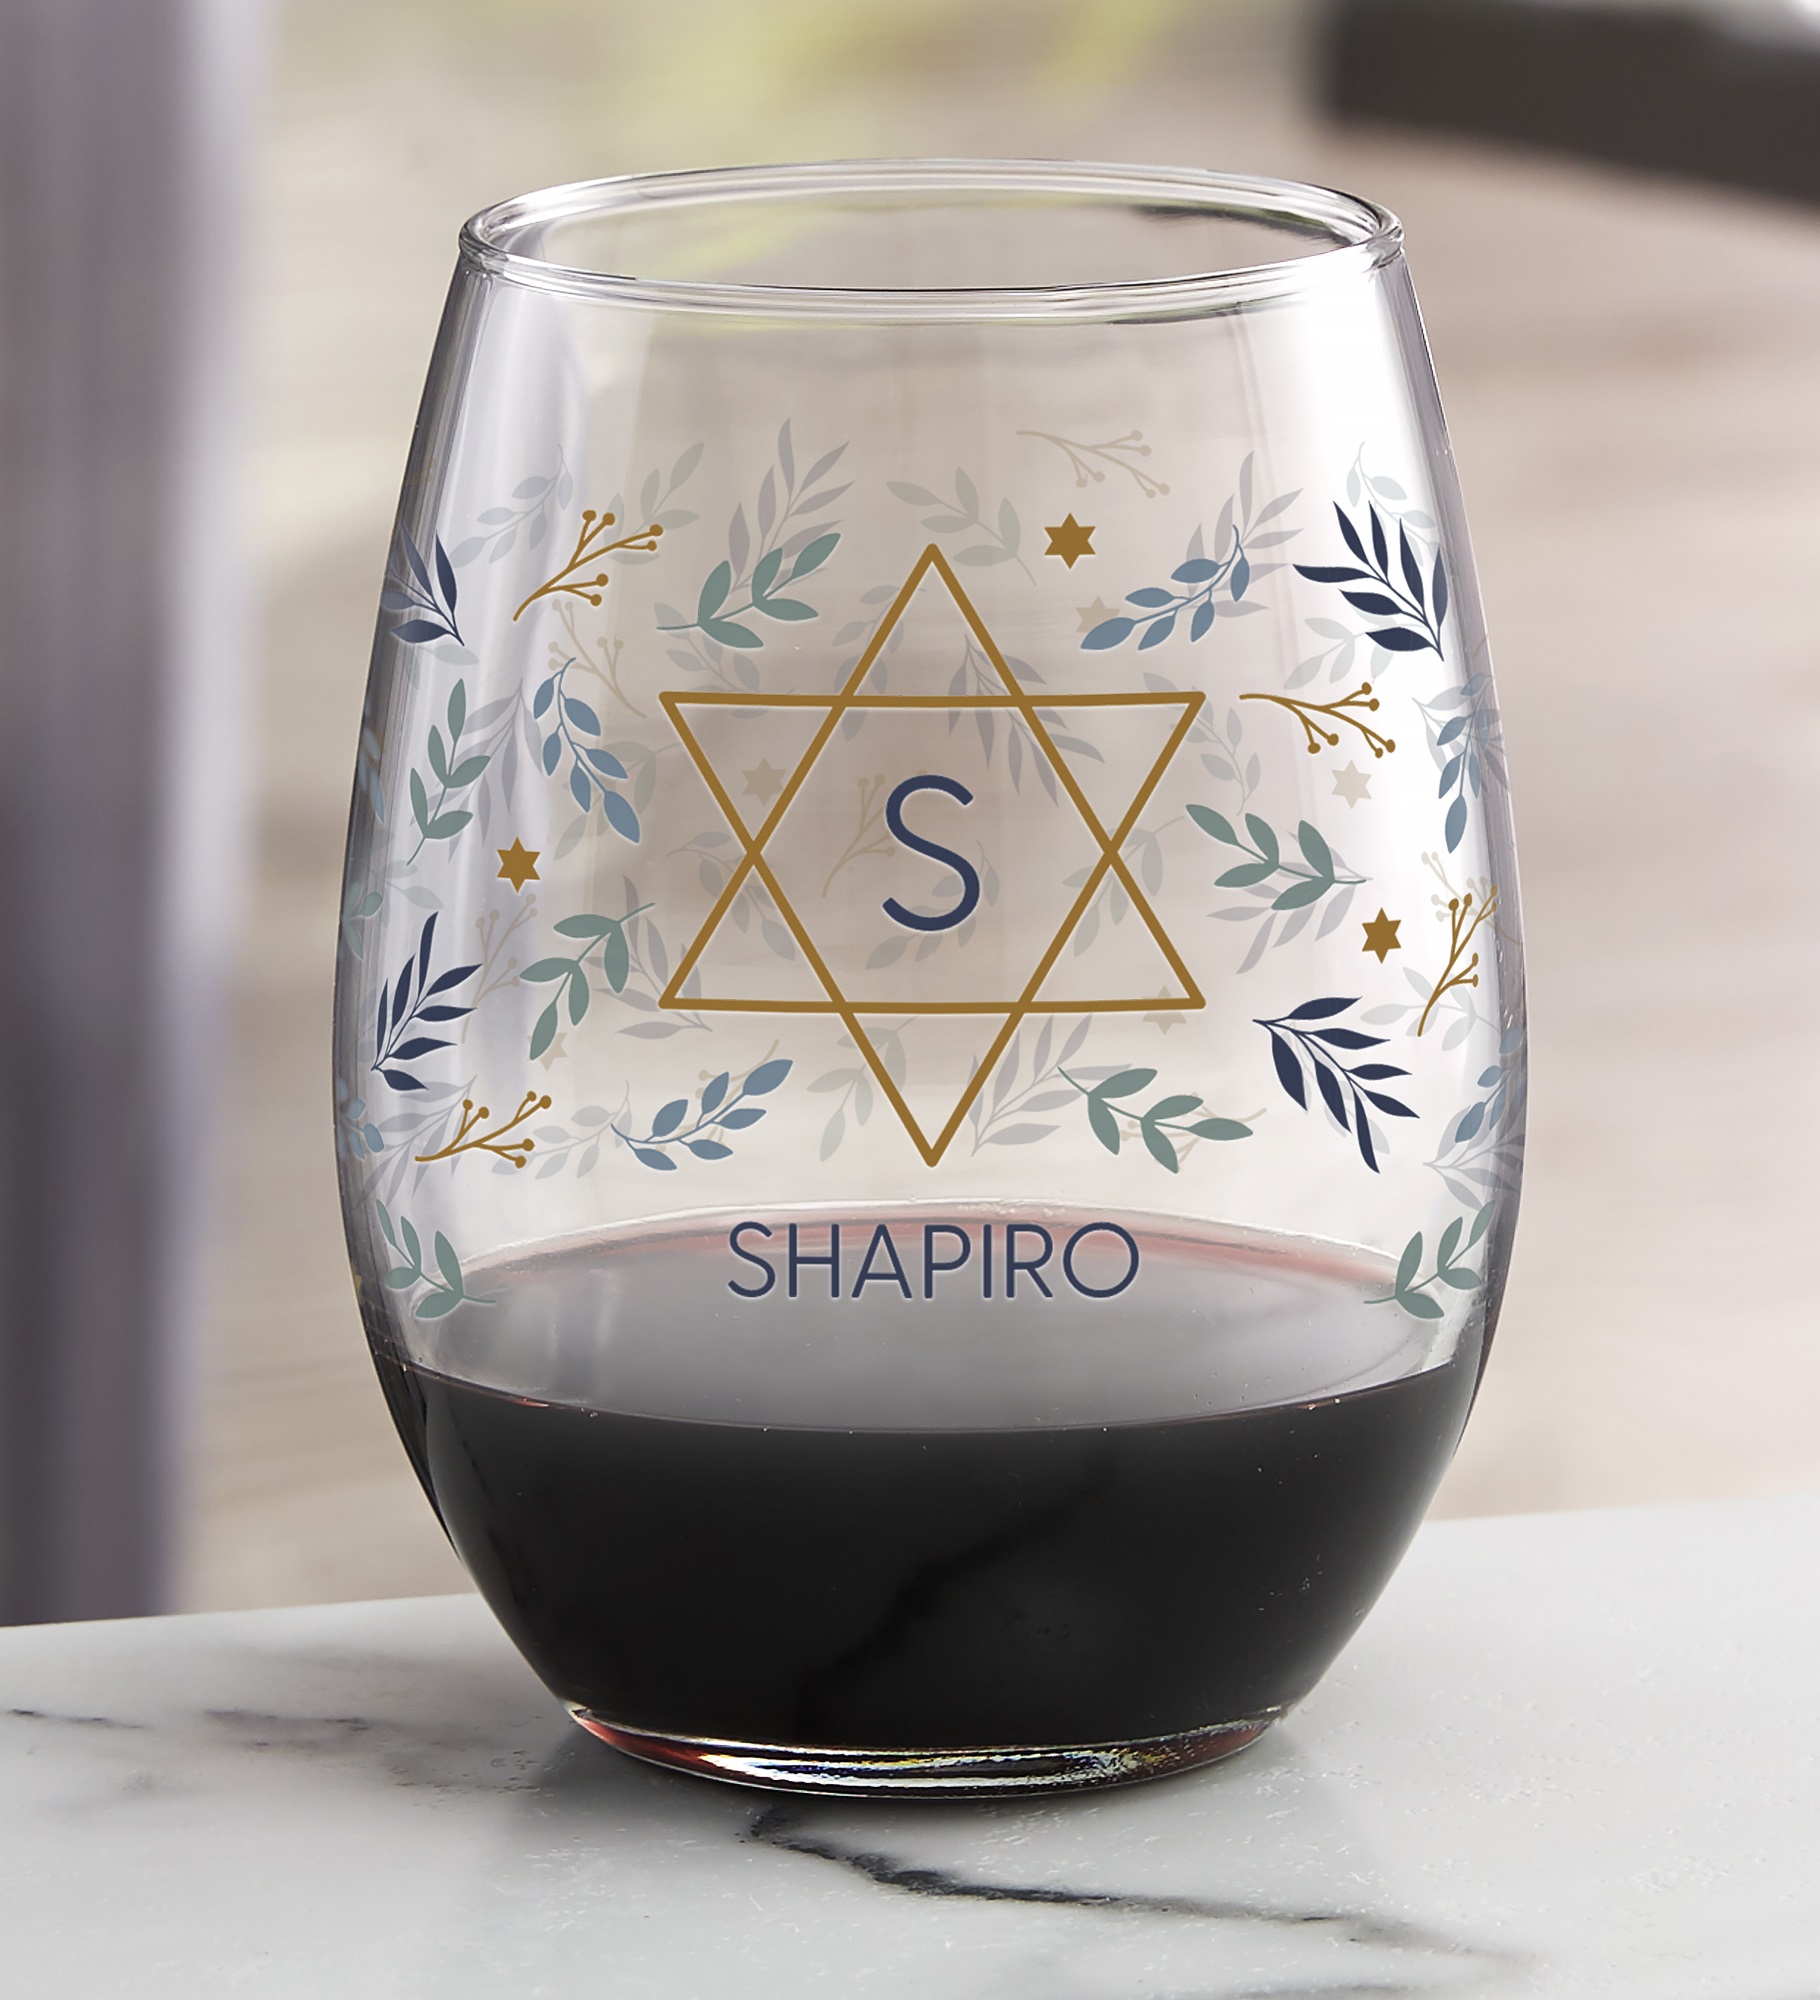 Spirit of Hanukkah Personalized Wine Glass Collection